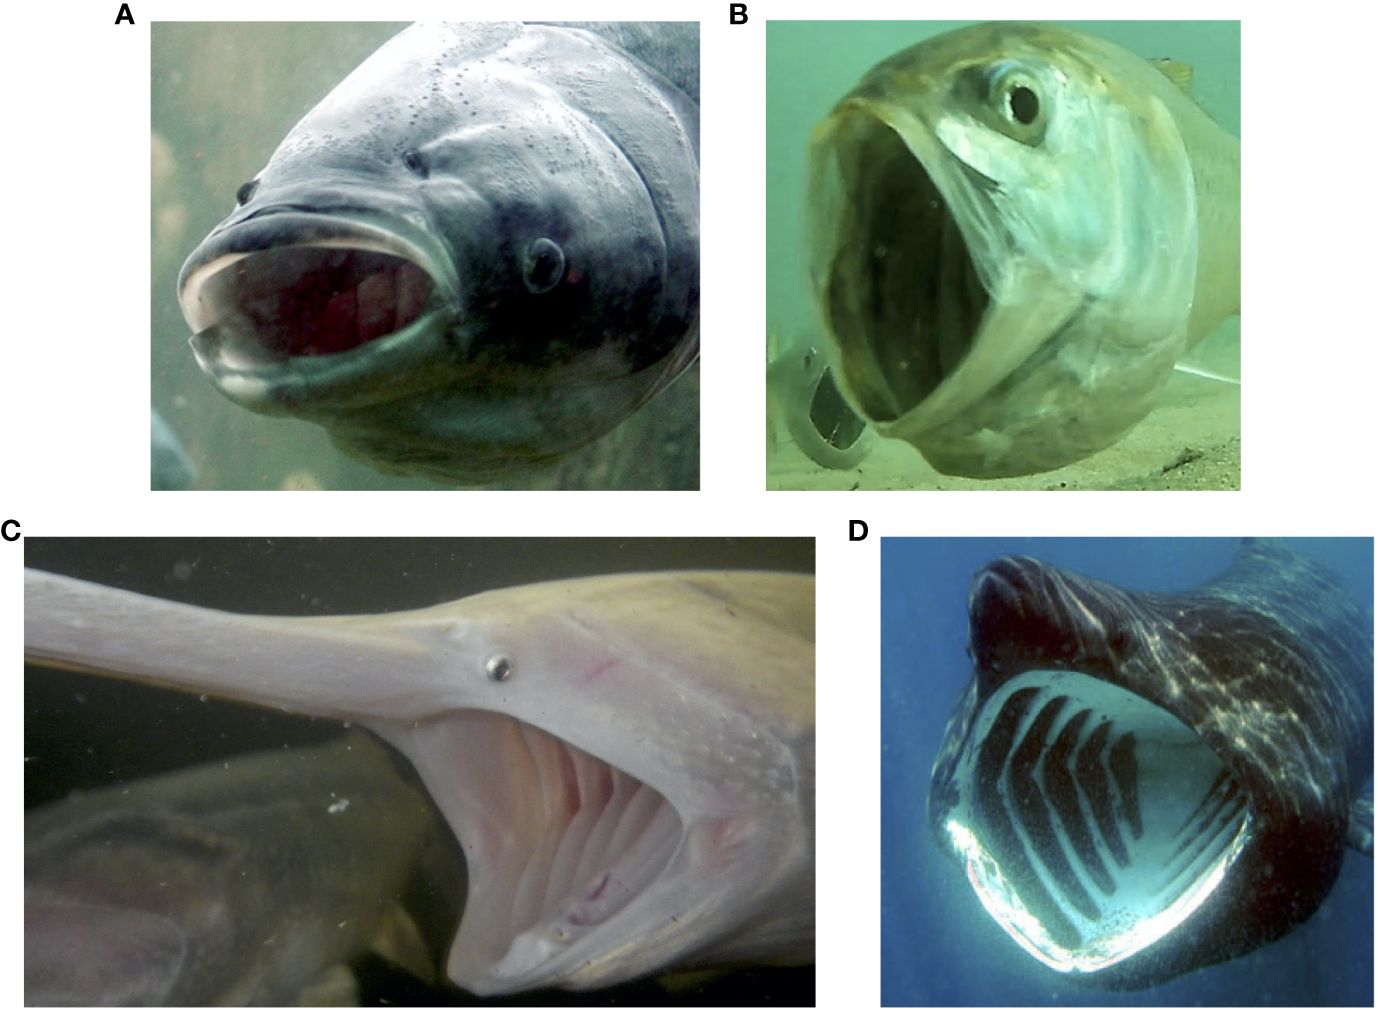 Frontiers  Particle separation mechanisms in suspension-feeding fishes:  key questions and future directions